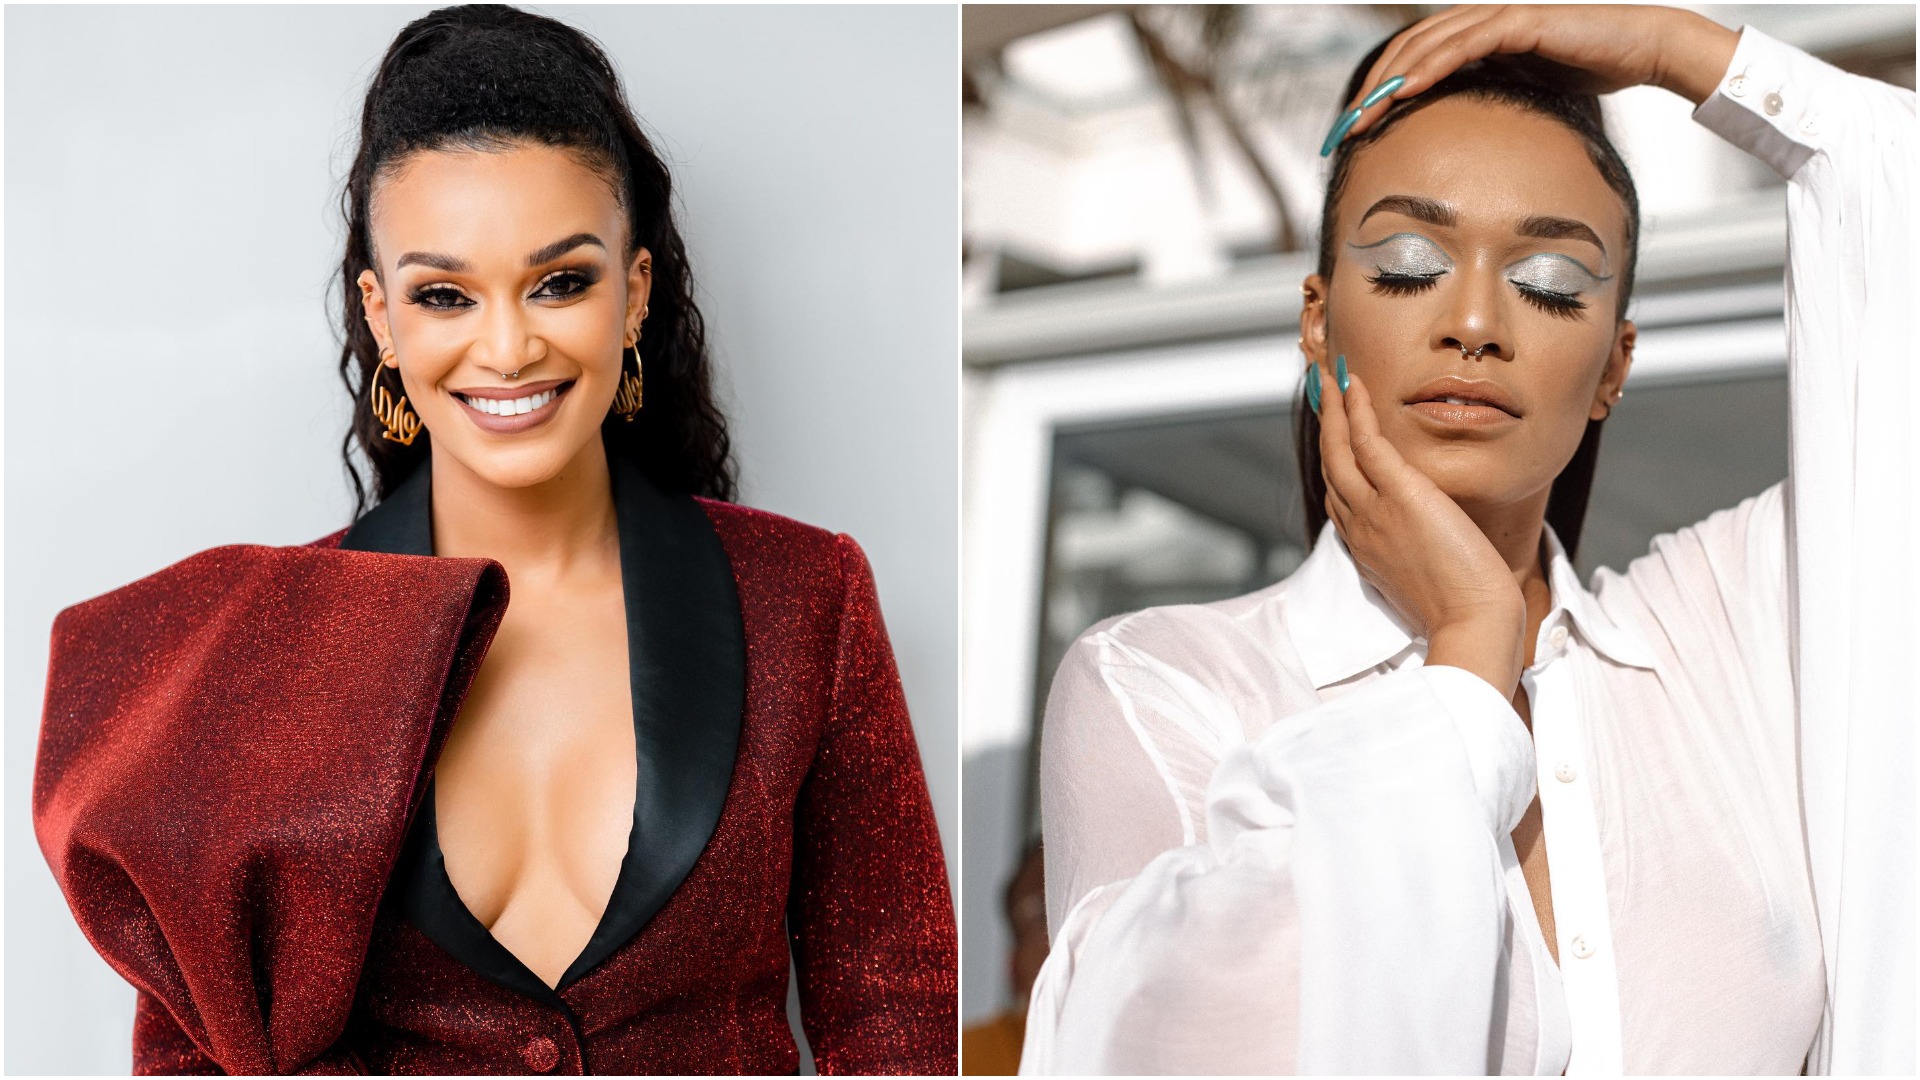 Pearl Thusi Divides Social Media With “Fake” Luxury Brands Post